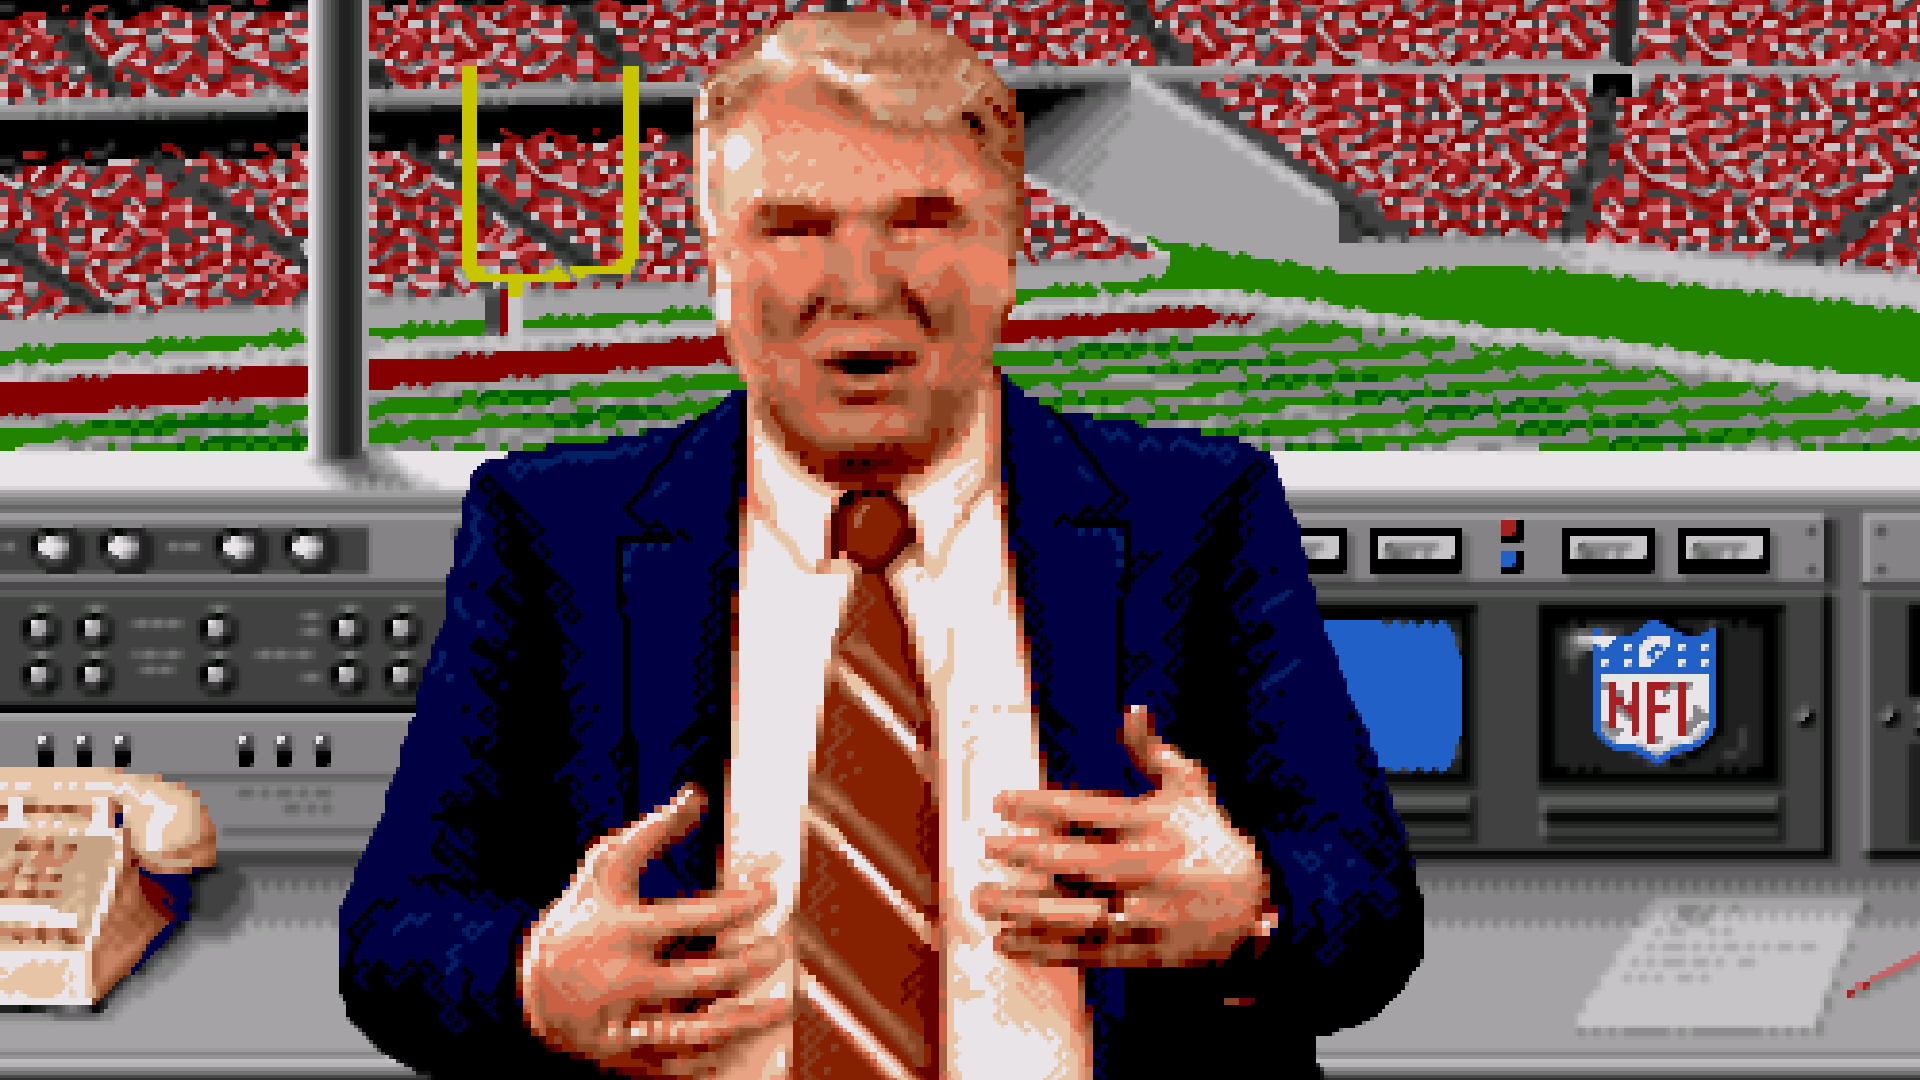 John Madden, the star of EA's Madden NFL series, has died at 85